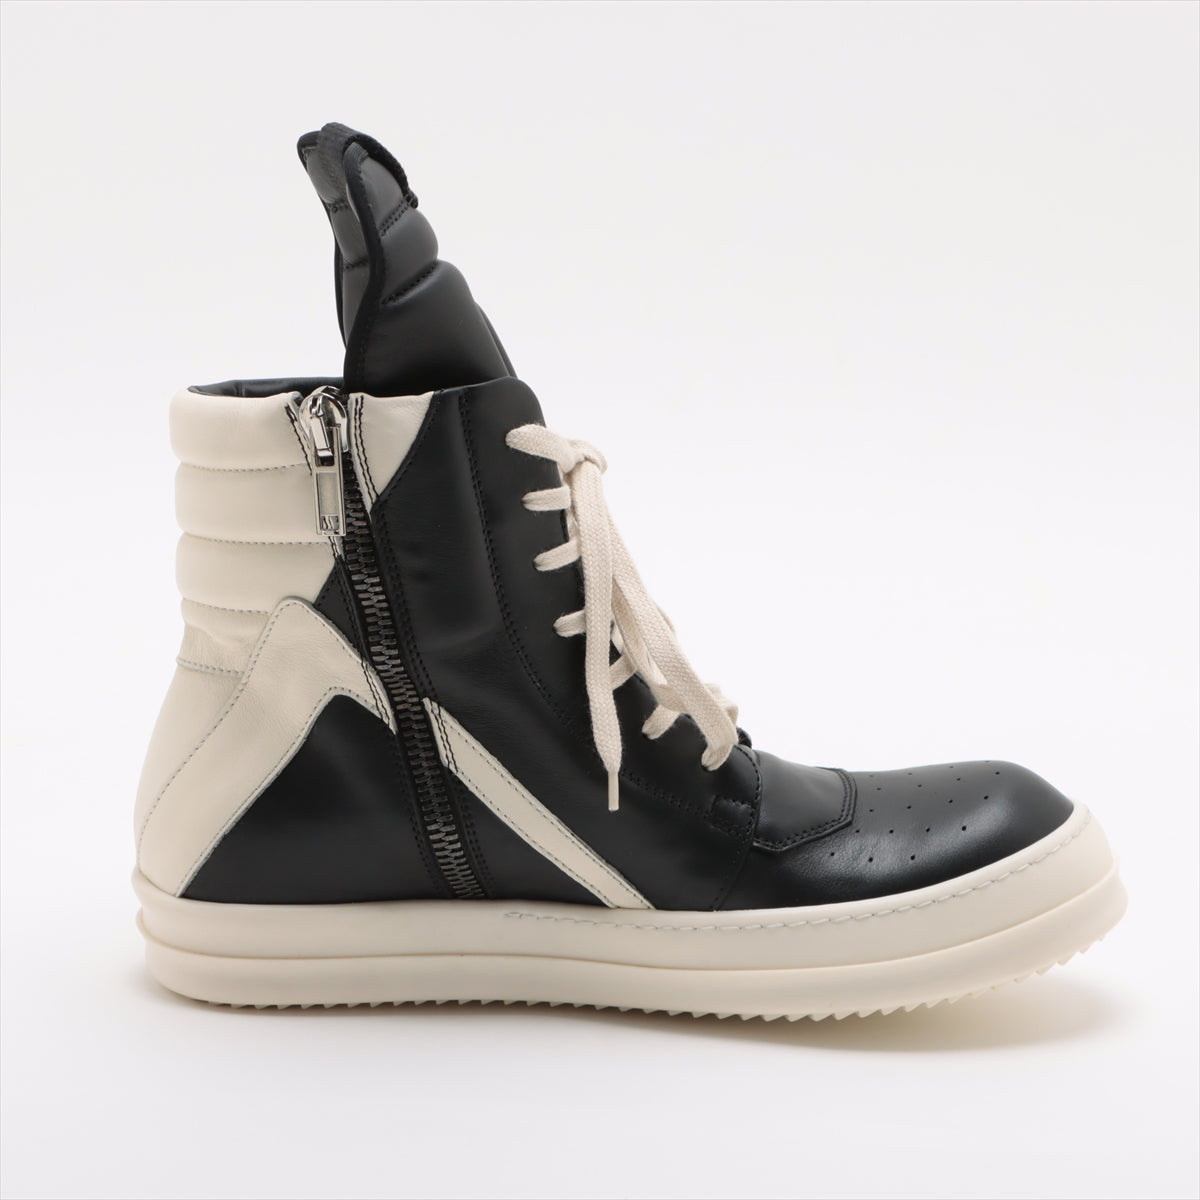 Rick Owens Geobasket Leather High-top Sneakers 43 Men's Black × White 3621 Is there a replacement string